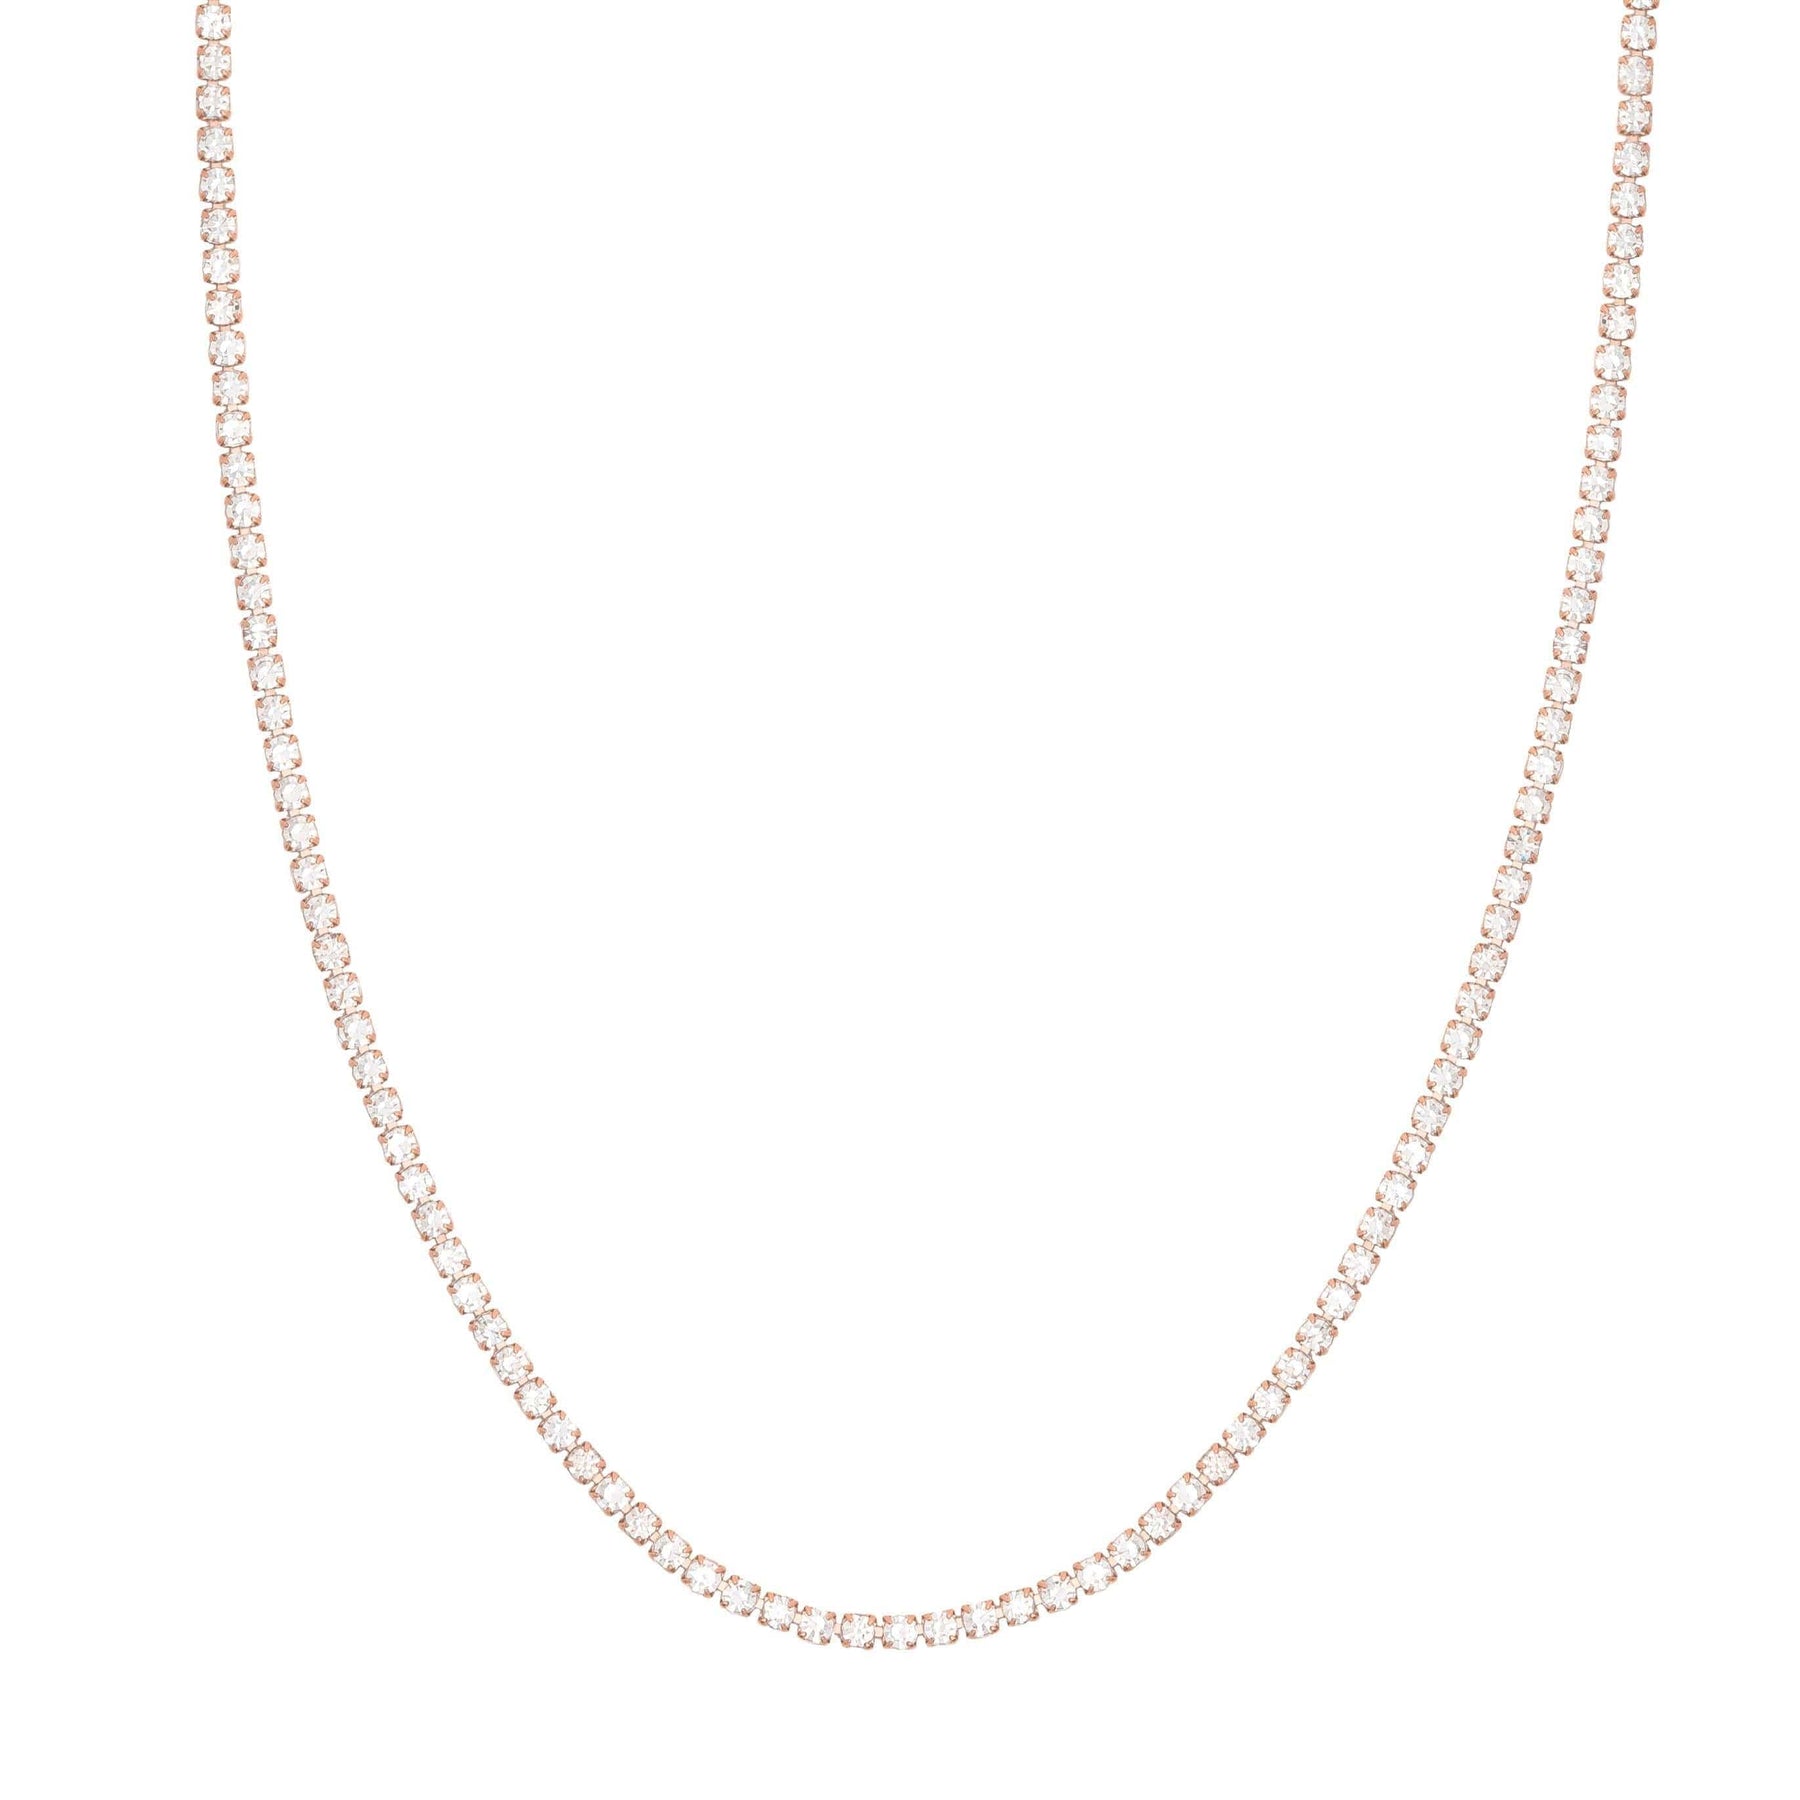 BohoMoon Stainless Steel Bardot Tennis Necklace Rose Gold